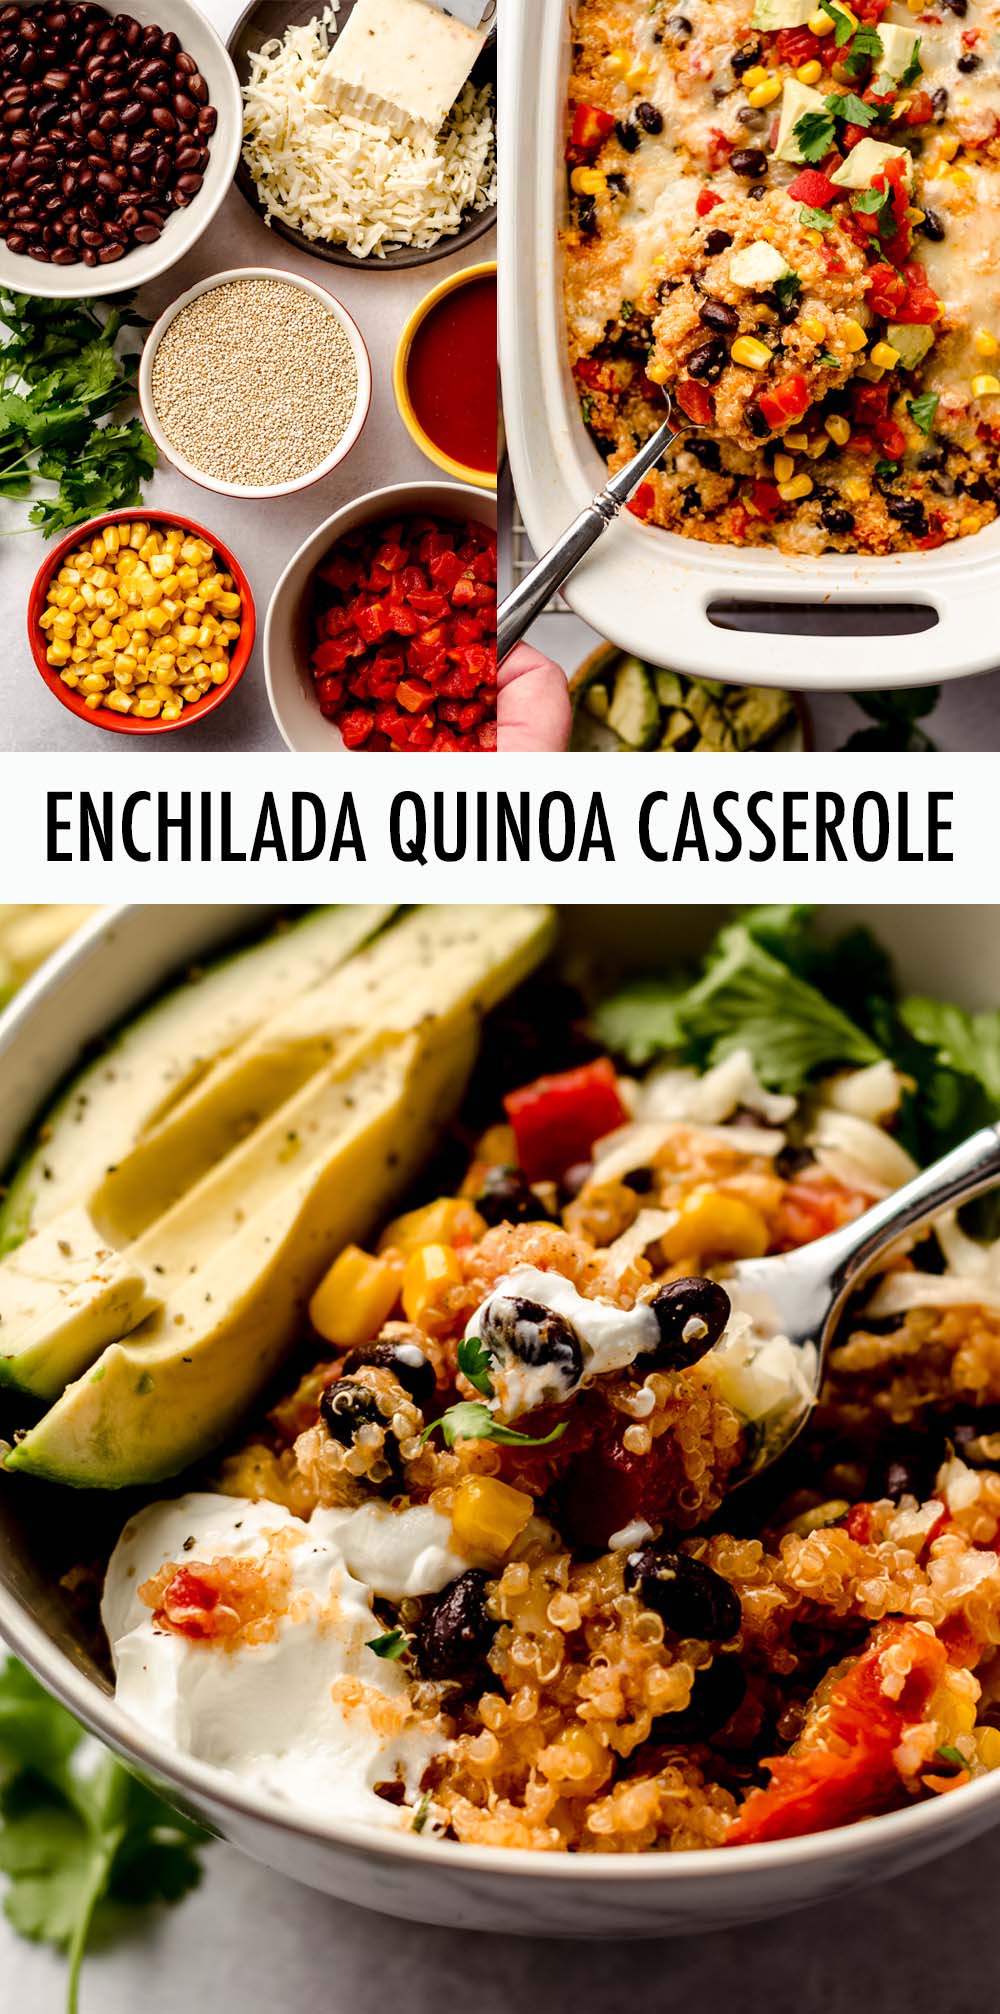 A quick and easy gluten free enchilada casserole full of spices, cheese, and nutrient-rich quinoa. via @frshaprilflours